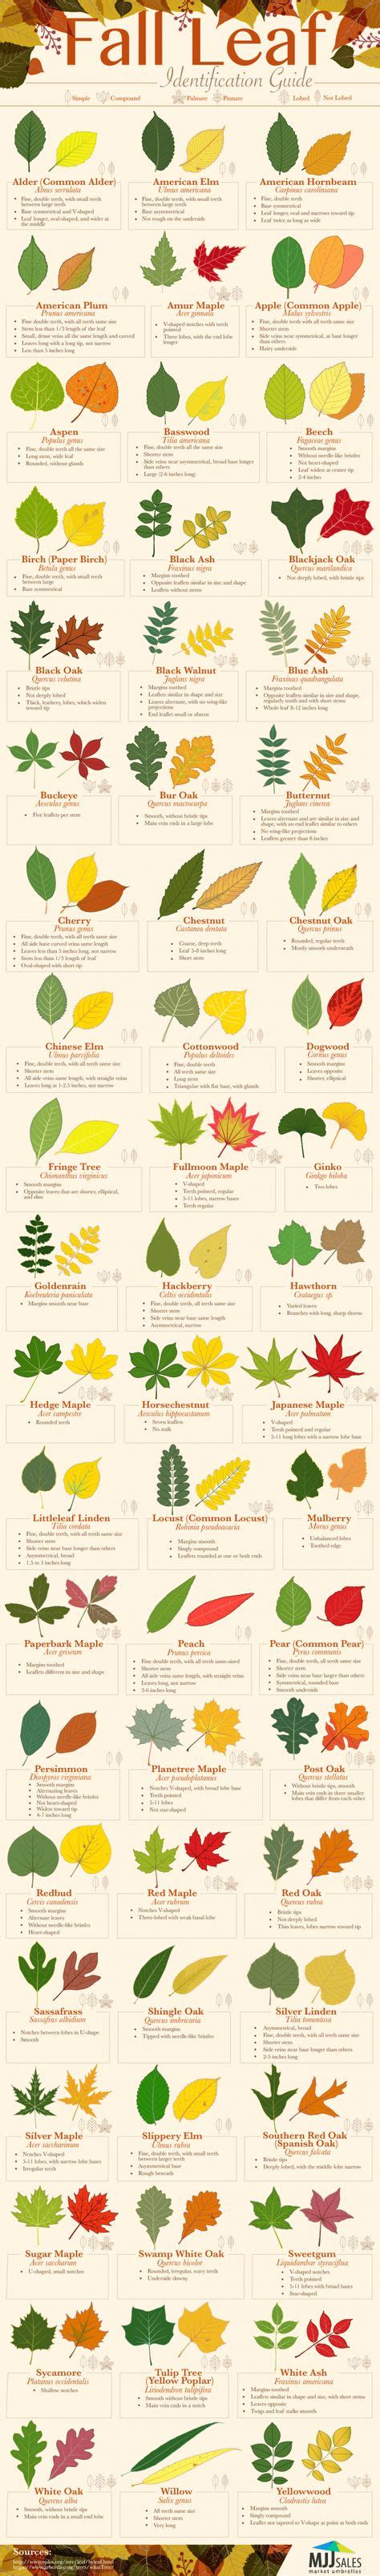 Fall Leaf Identification Guide Cooking Recipes Food